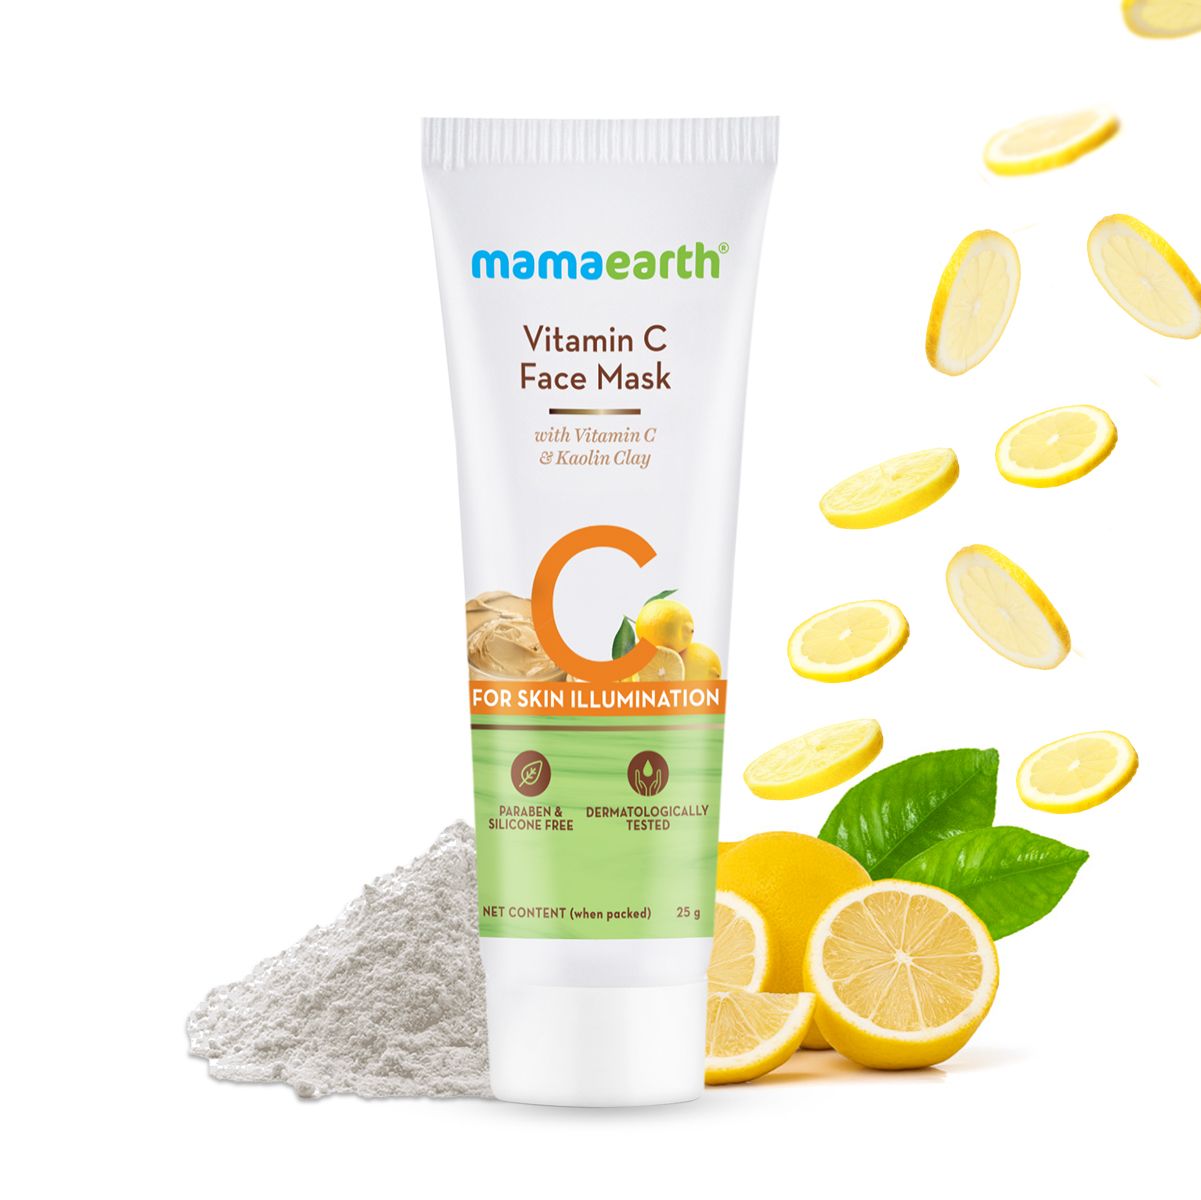 Mamaearth Vitamin C Face Mask Better Than Others Available In The Market?